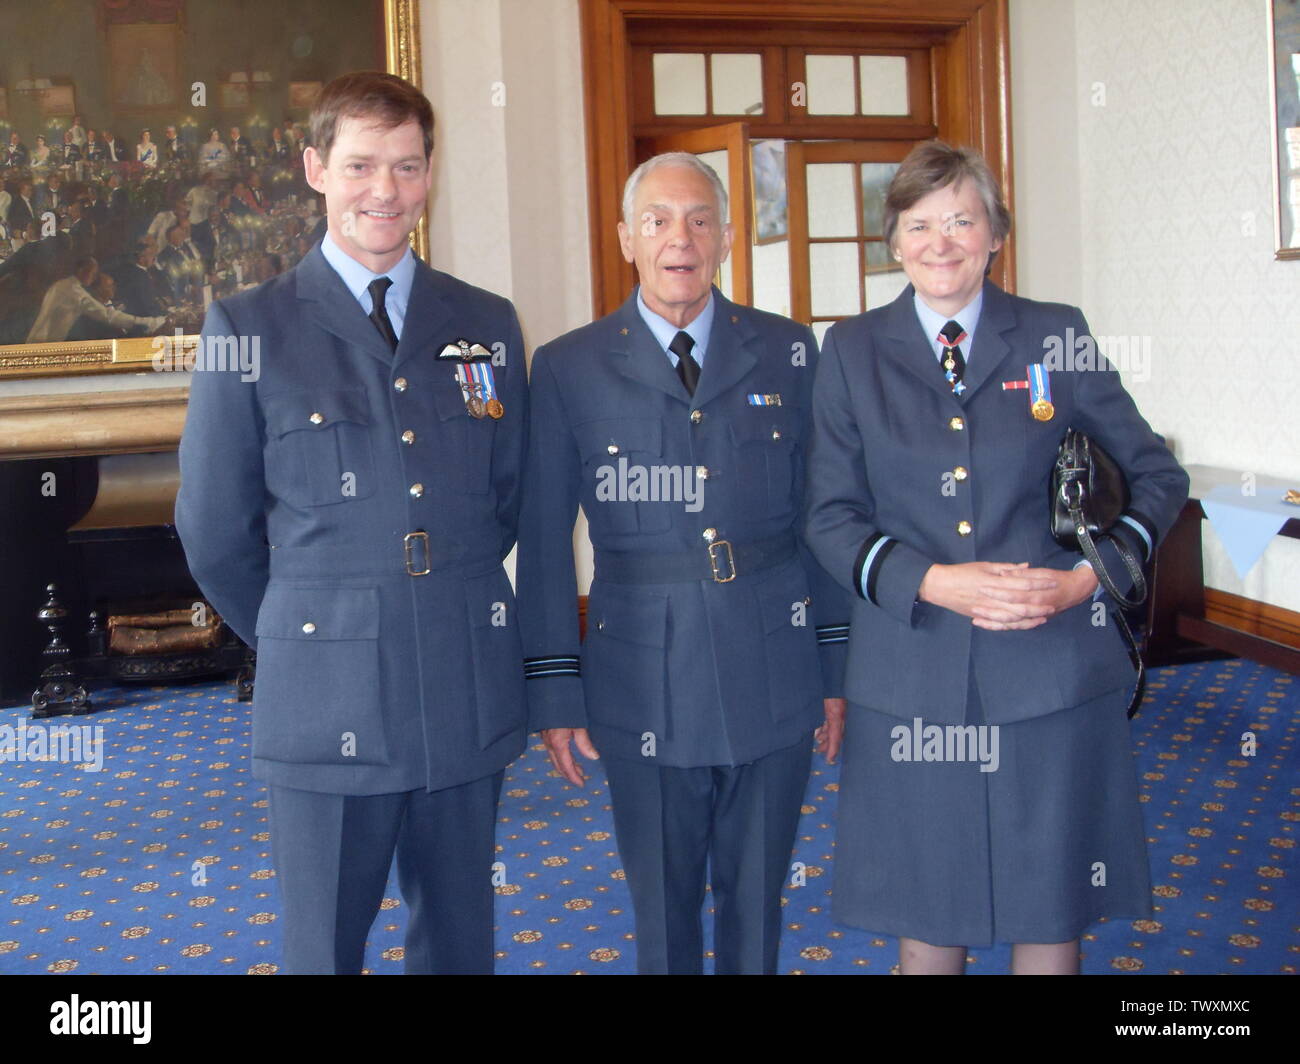 Air Commodore Ian Stewart RAF, Flt Lt A.R.T. Bennett RAF VR(T) and Air Commodore Barbara Cooper RAF at RAFC Cranwell Other Versions Air Cmdr Barbara Cooper.jpg; 3 June 2010 (original upload date); Transferred from en.pedia to Commons by Sreejithk2000 using CommonsHelper.; Goober alive at English pedia; Stock Photo